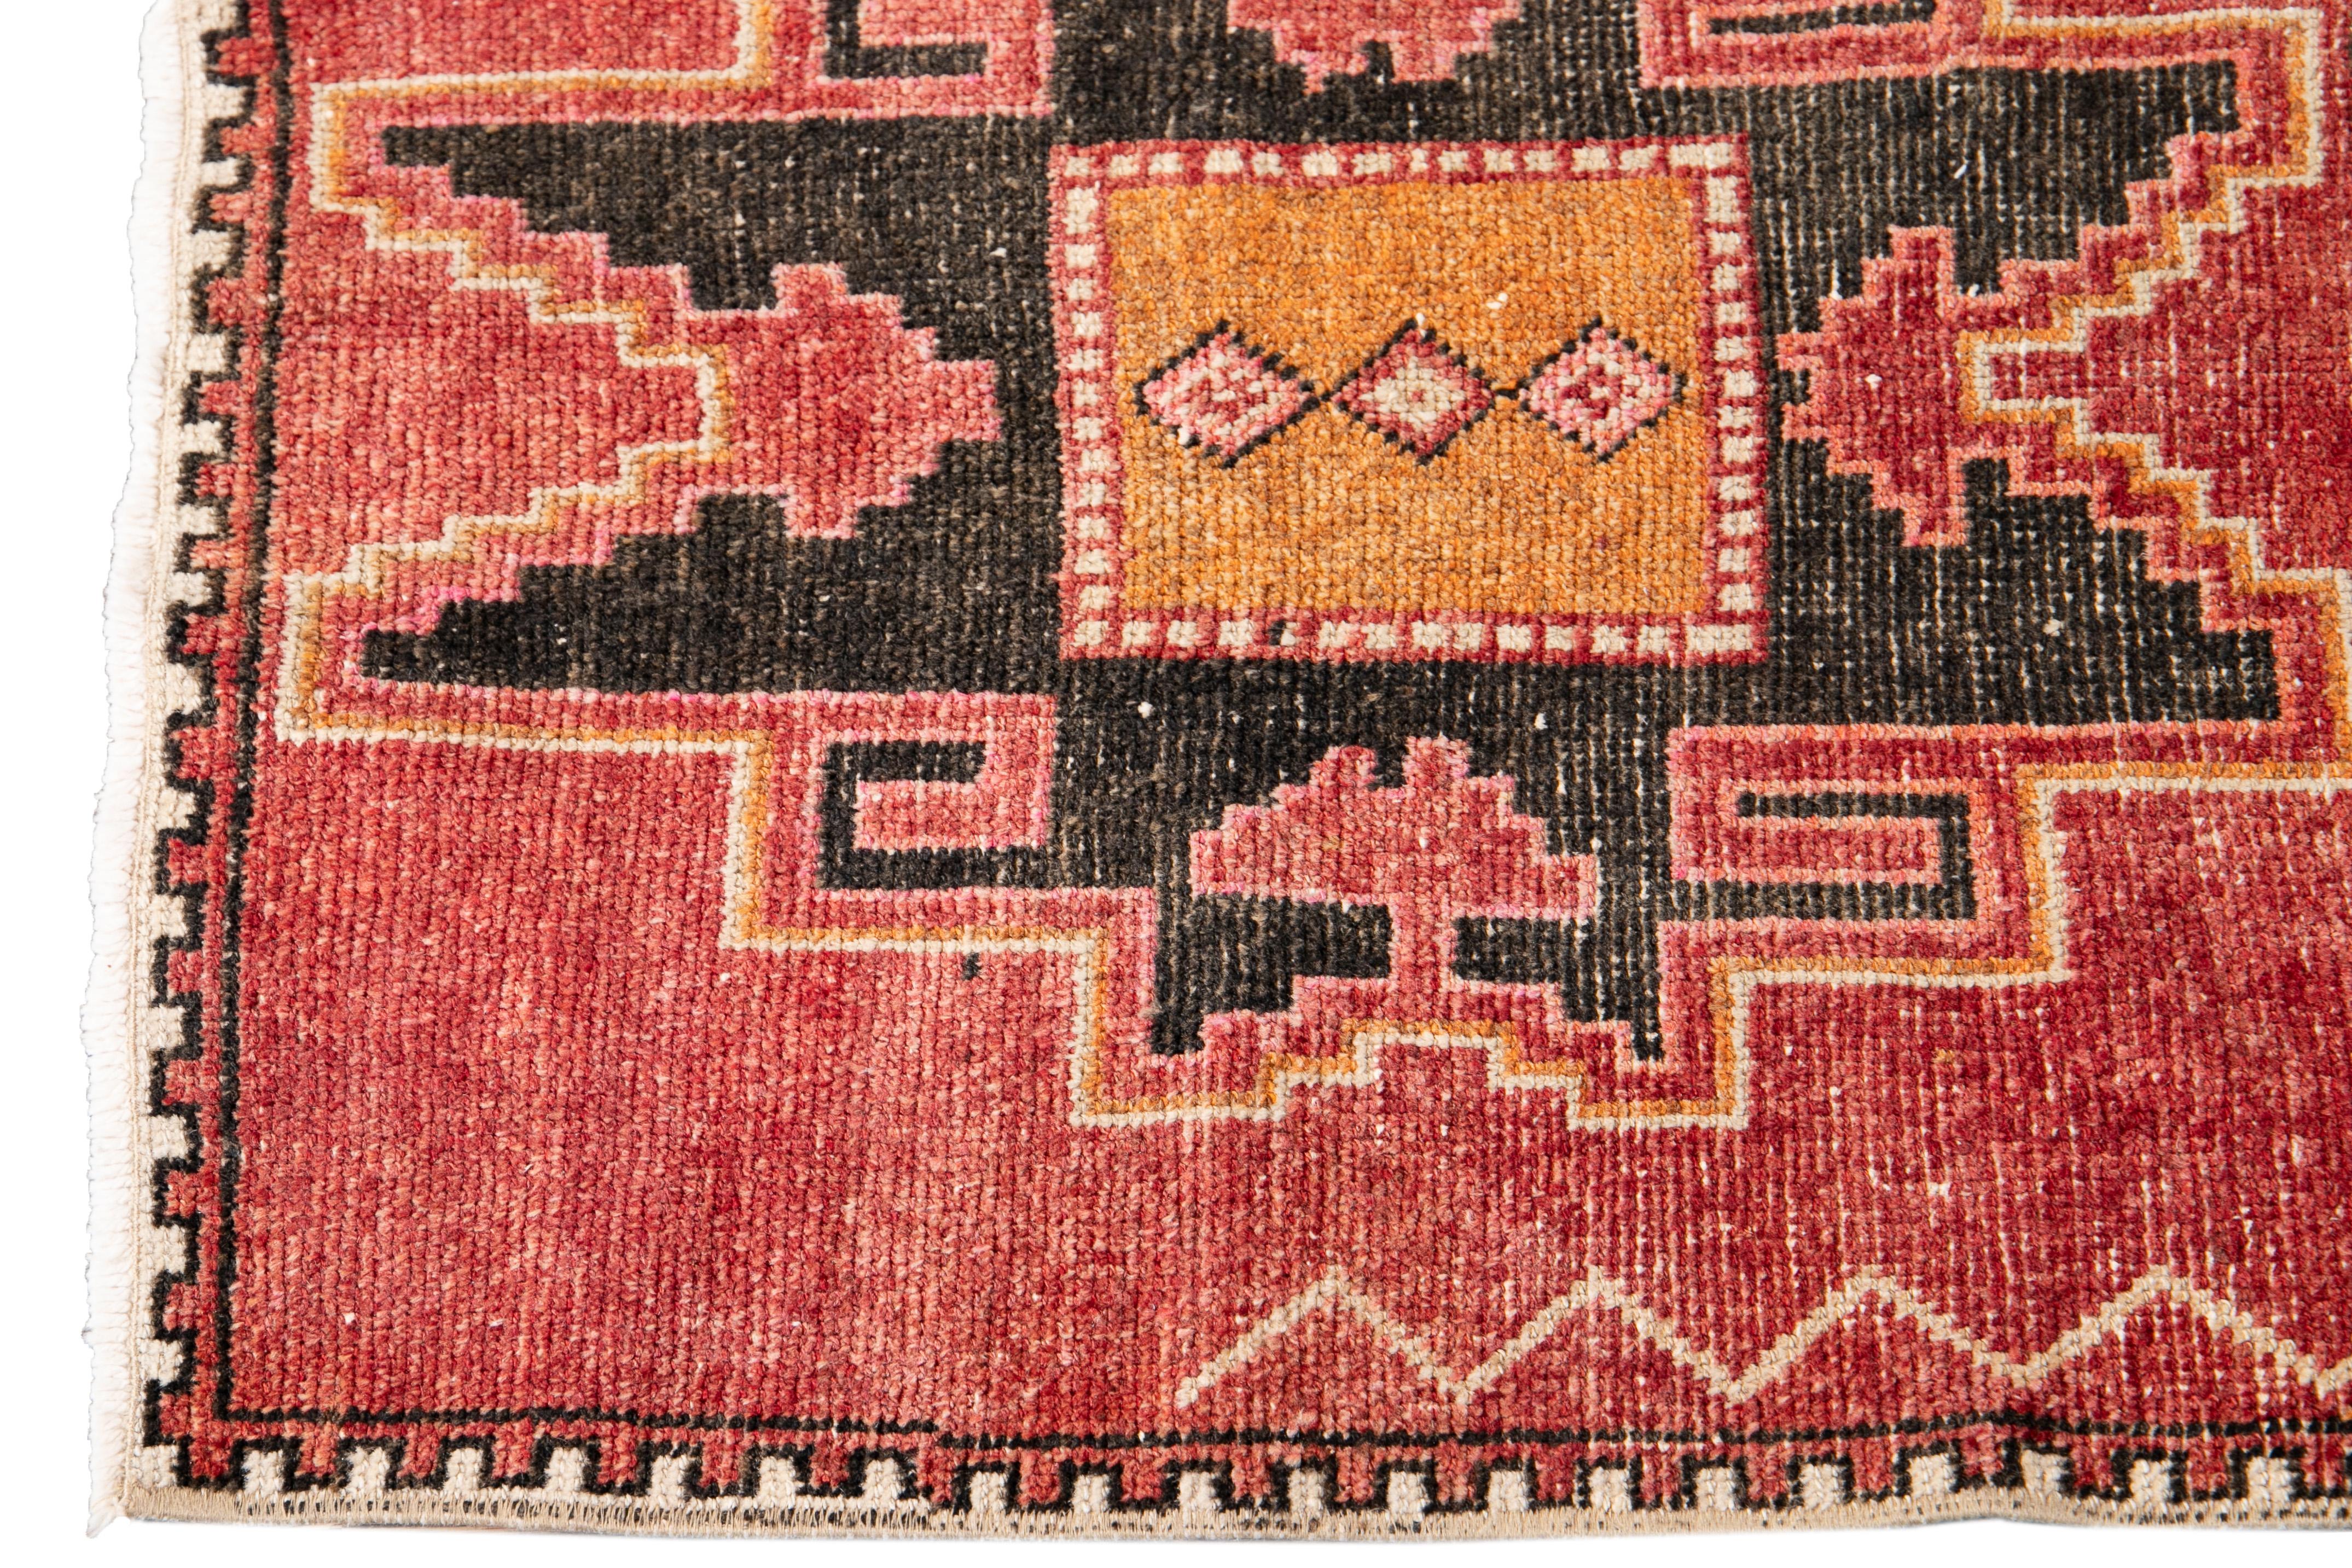 Beautiful Antique Runner rug, hand knotted wool with a light rust field, orange and dark brown accents in an allover multi medallion geometric design.

This rug measures 2' 8